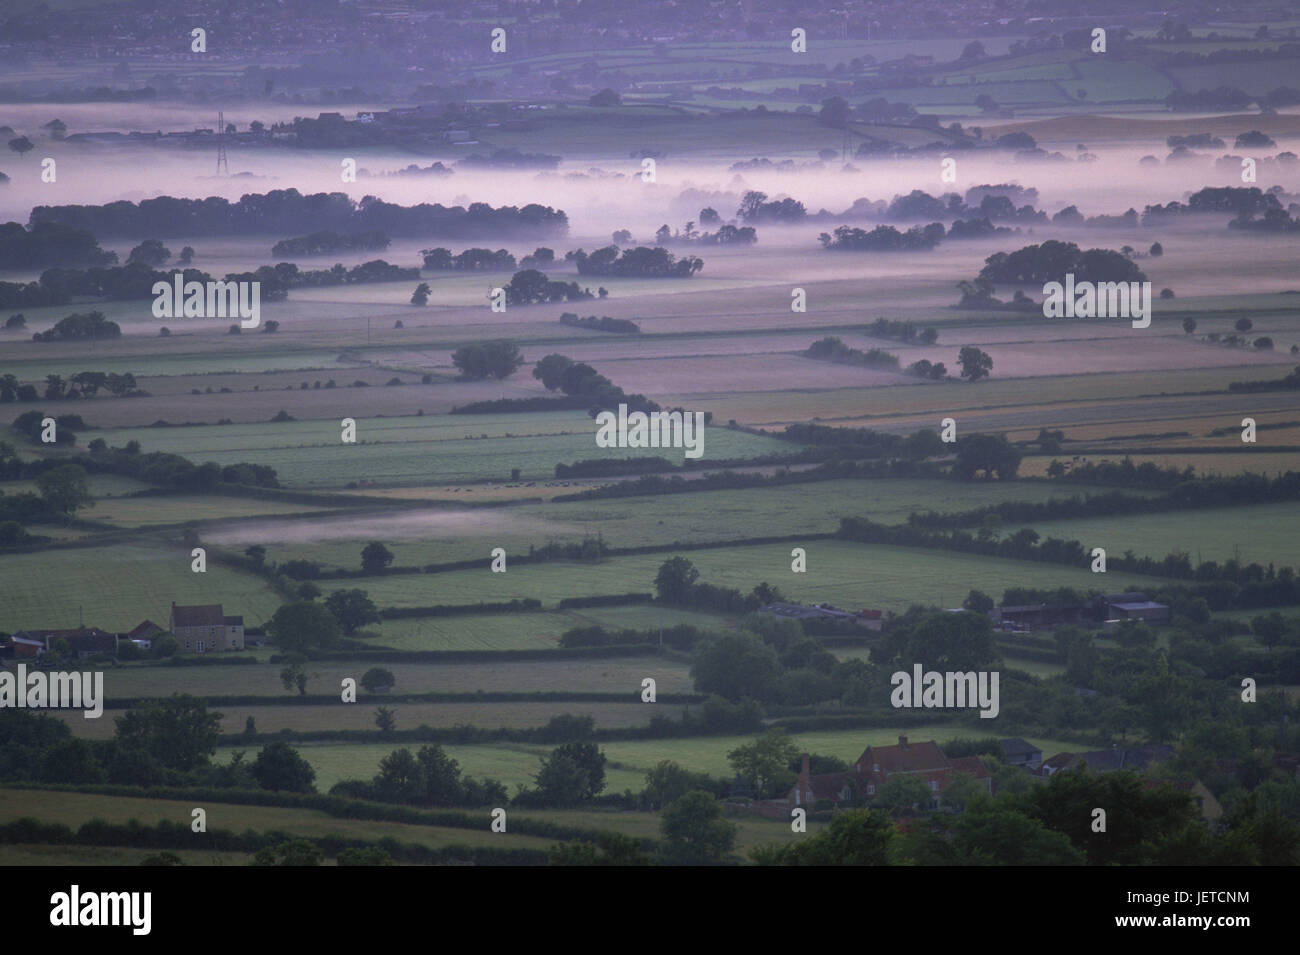 Great Britain, England, Somerset, scenery, fields, view, foggy, Europe, width, distance, field scenery, trees, demarcation, agriculture, foggy, dusk, farms, isolates, remotely, houses, Stock Photo